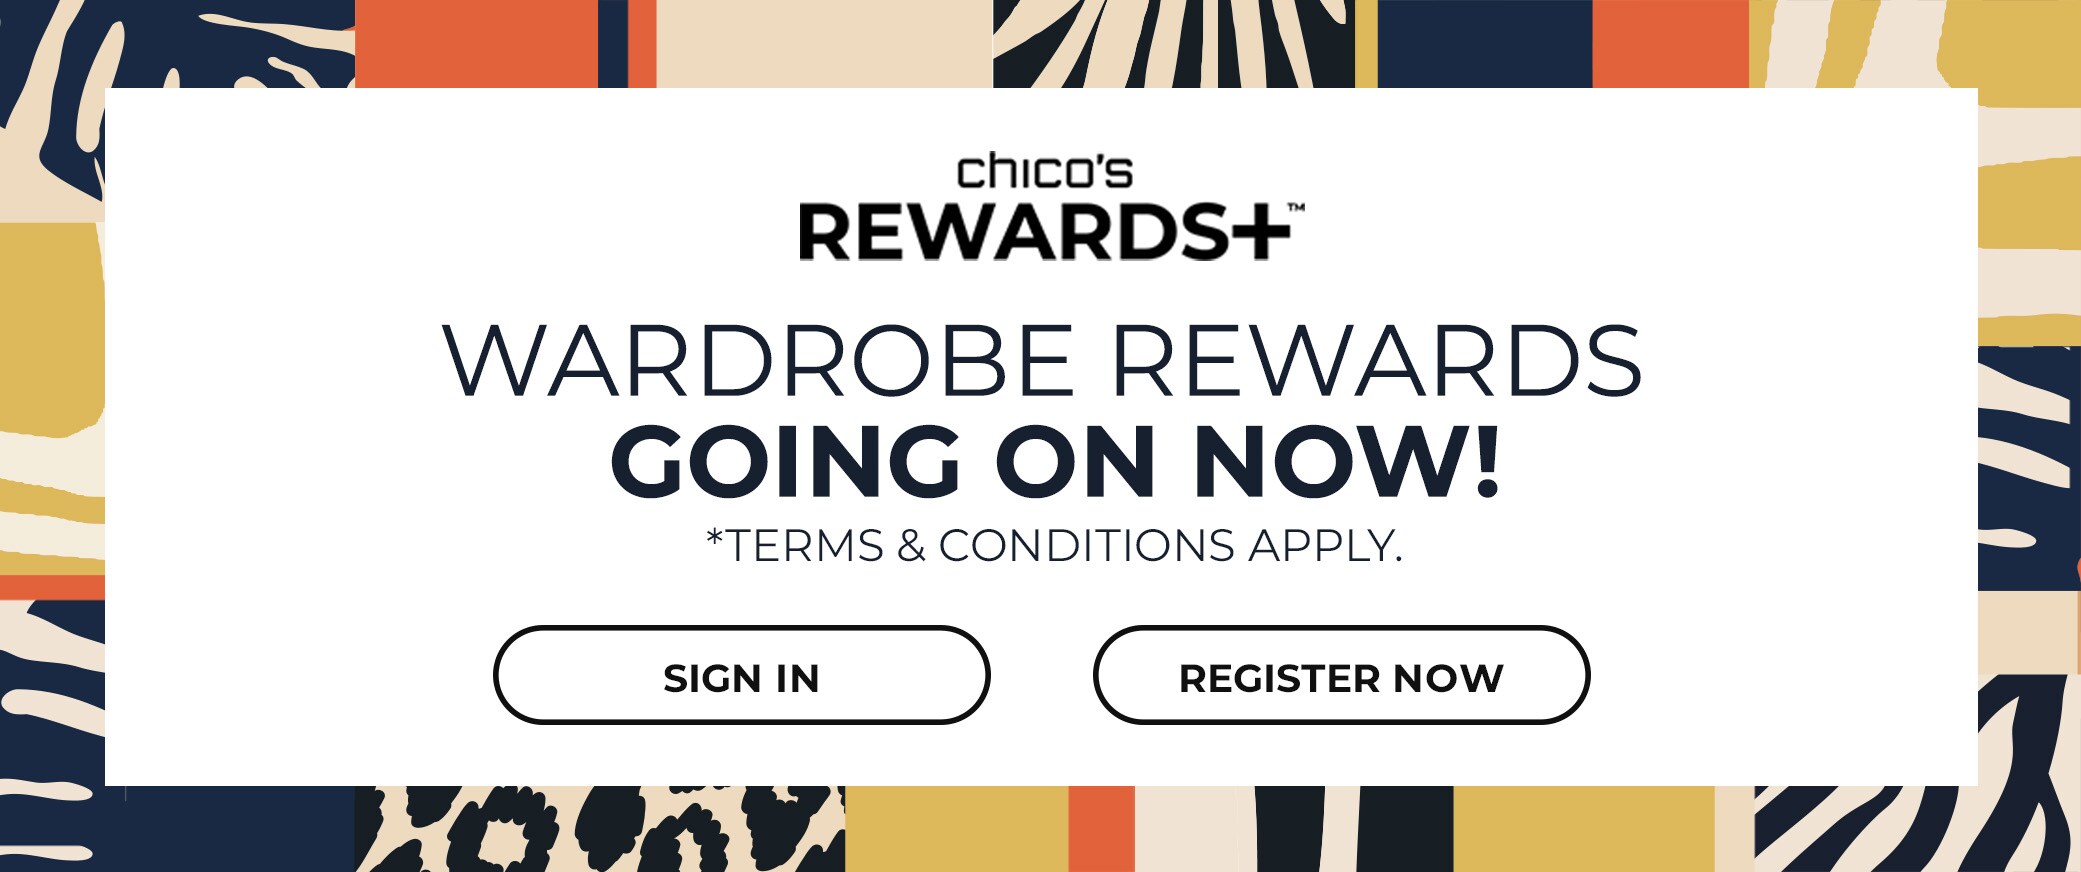 Chicos Rewards+ Wardrobe Rewards Going On Now! Terms and Conditions Apply. Sign In